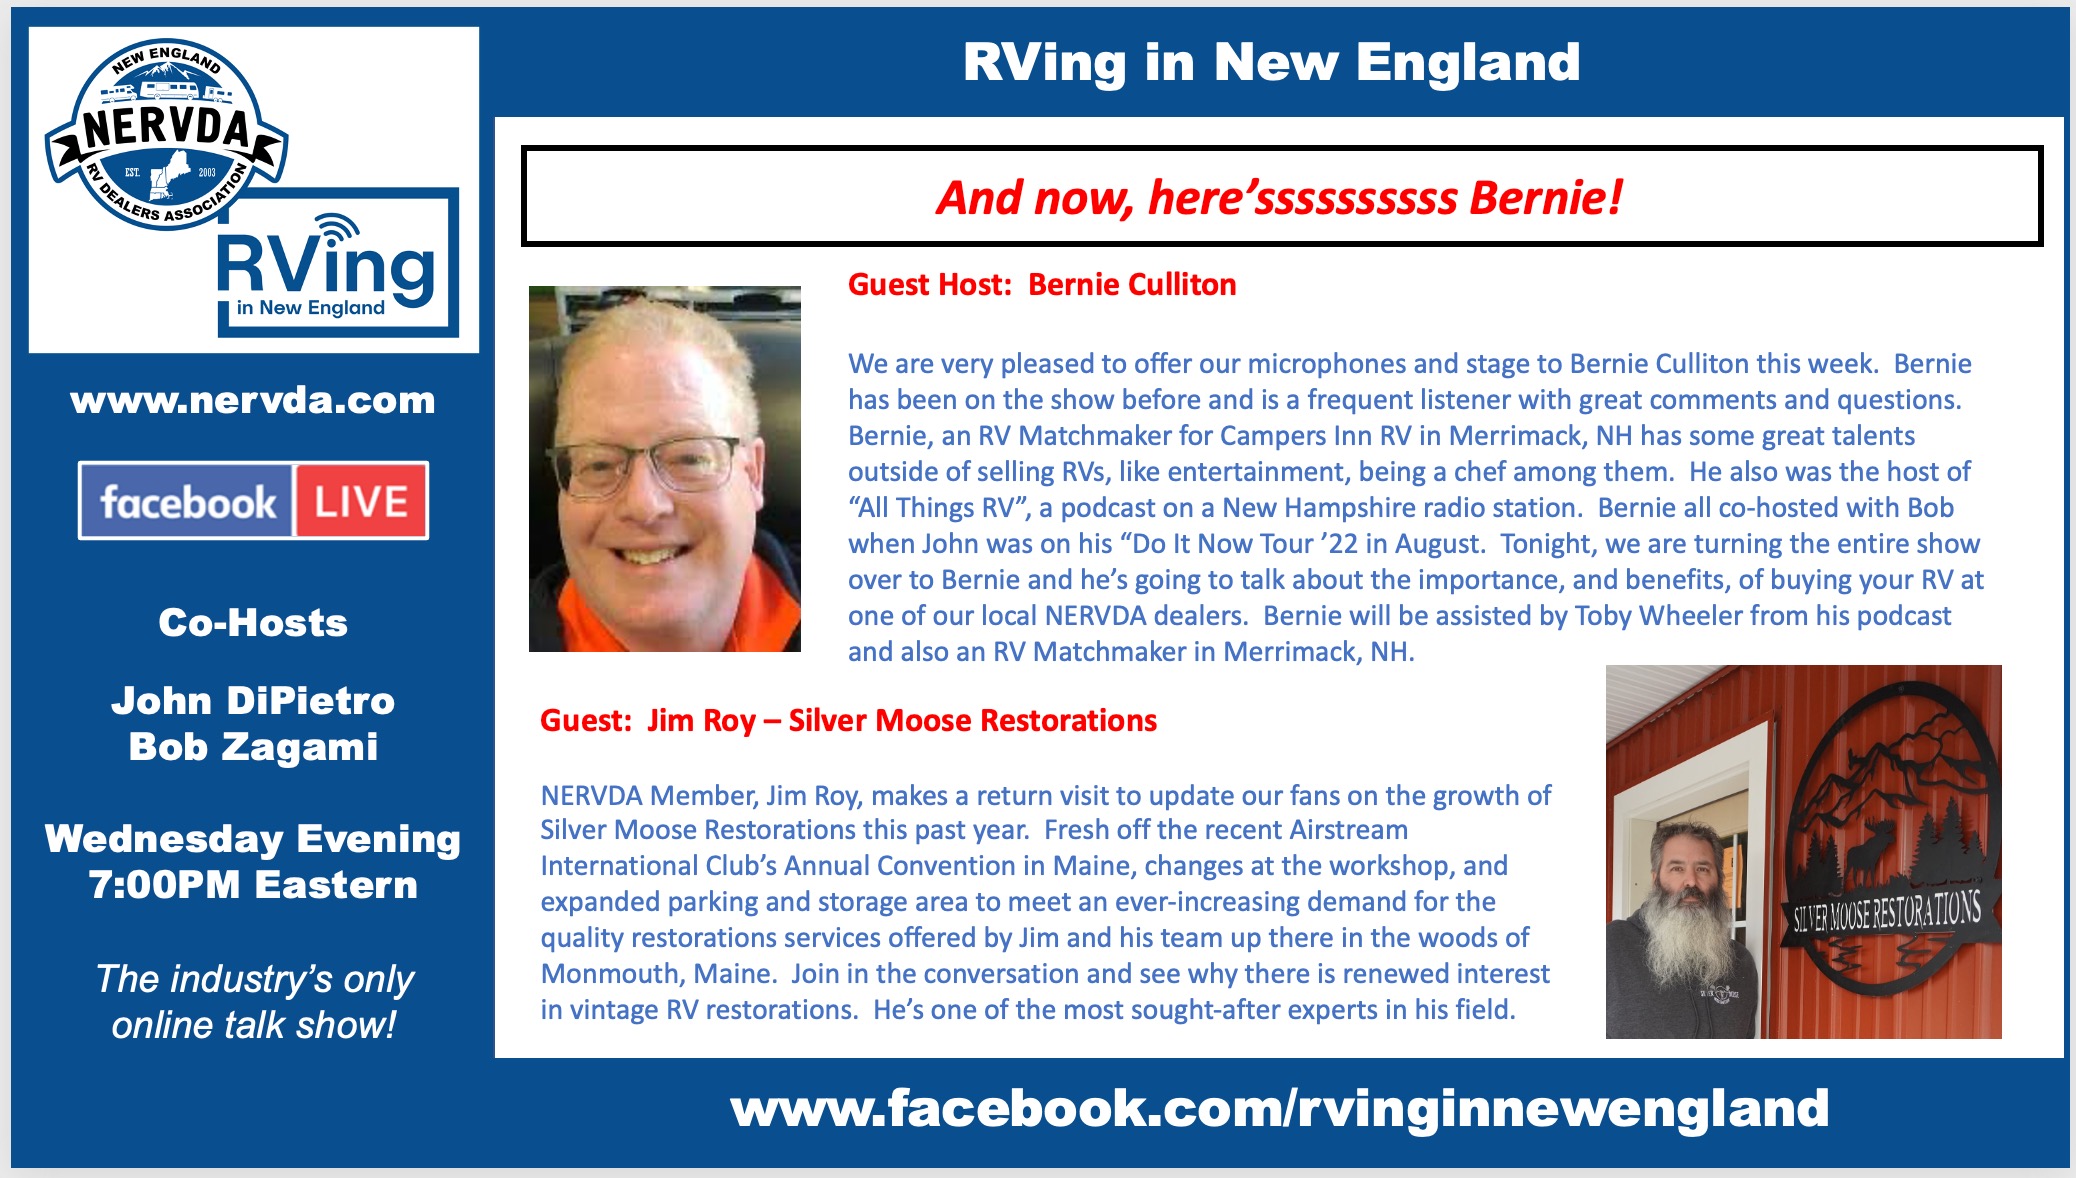 ‘RVing in New England’ Welcomes Guest Host Bernie Culliton